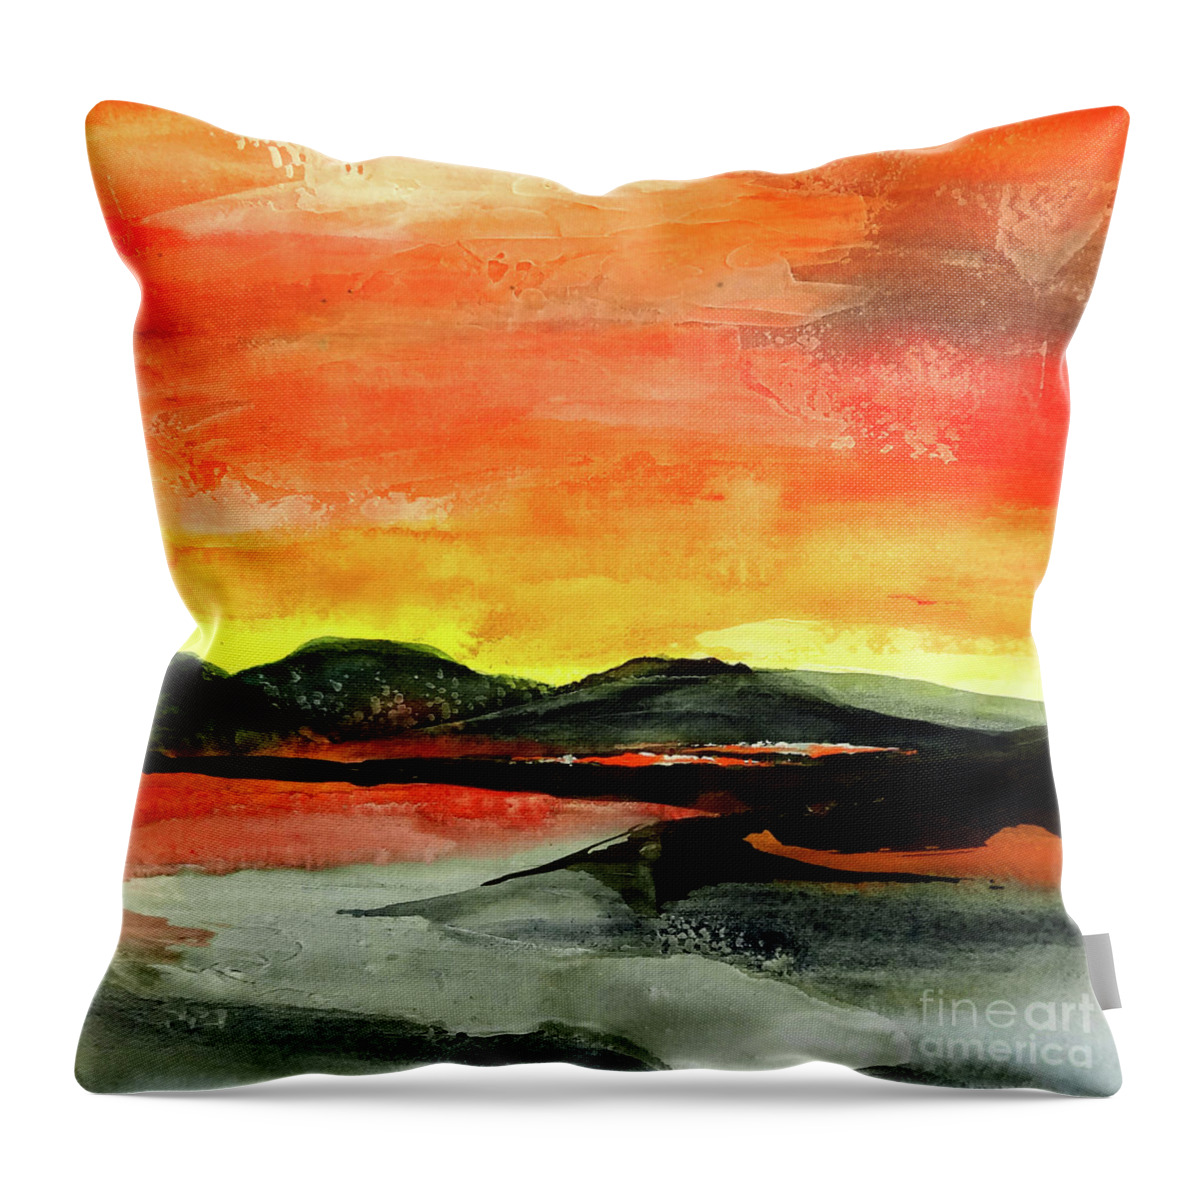 Original Watercolors Throw Pillow featuring the painting Taos Gold by Chris Paschke